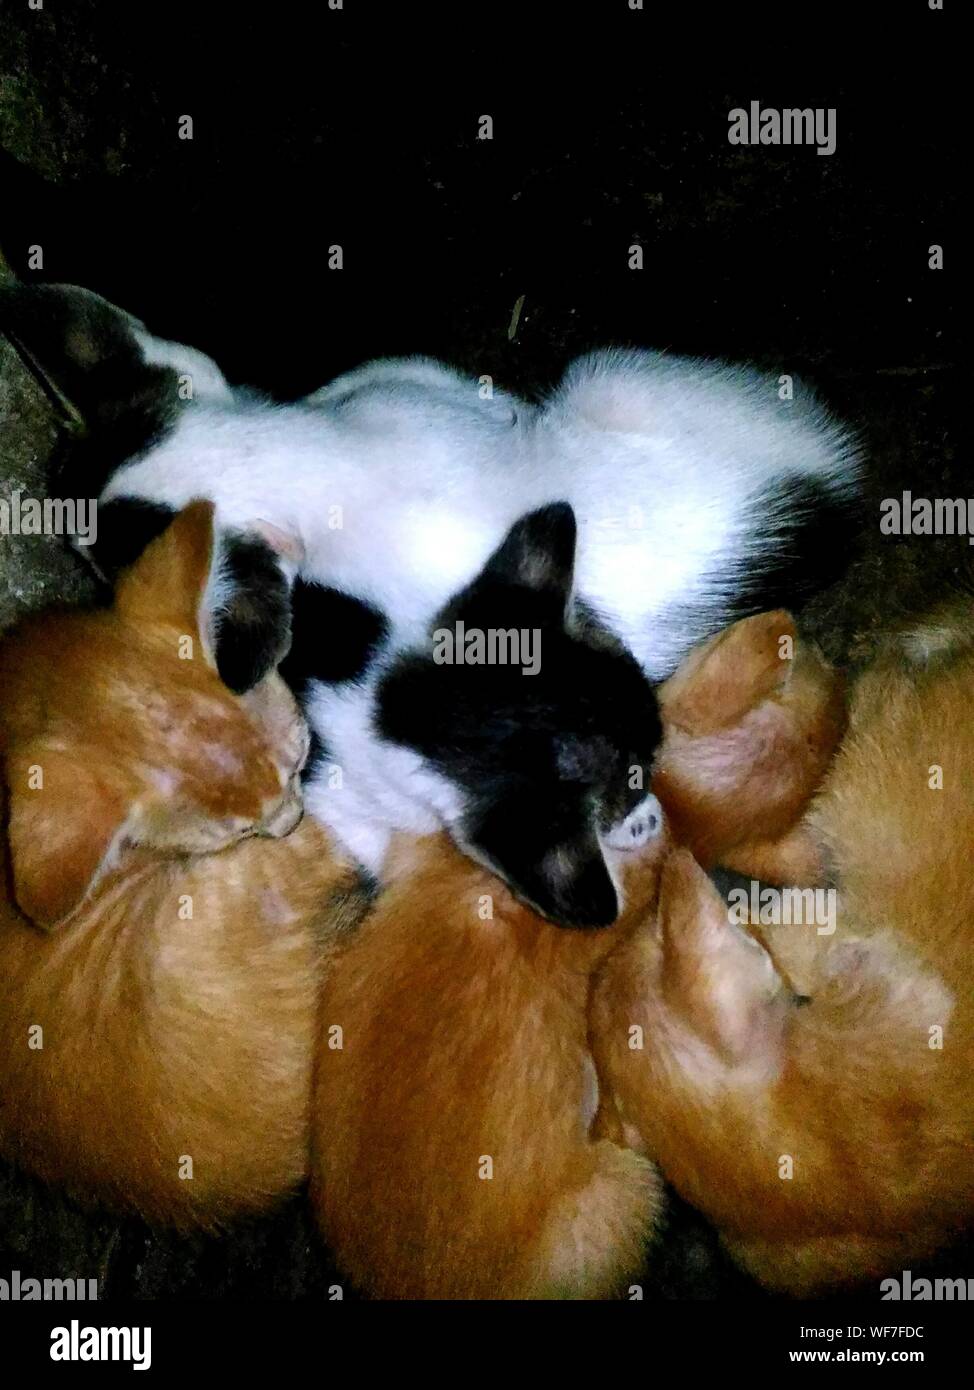 High Angle View Of Stray Cats Sleeping Togetherness Banque D'Images